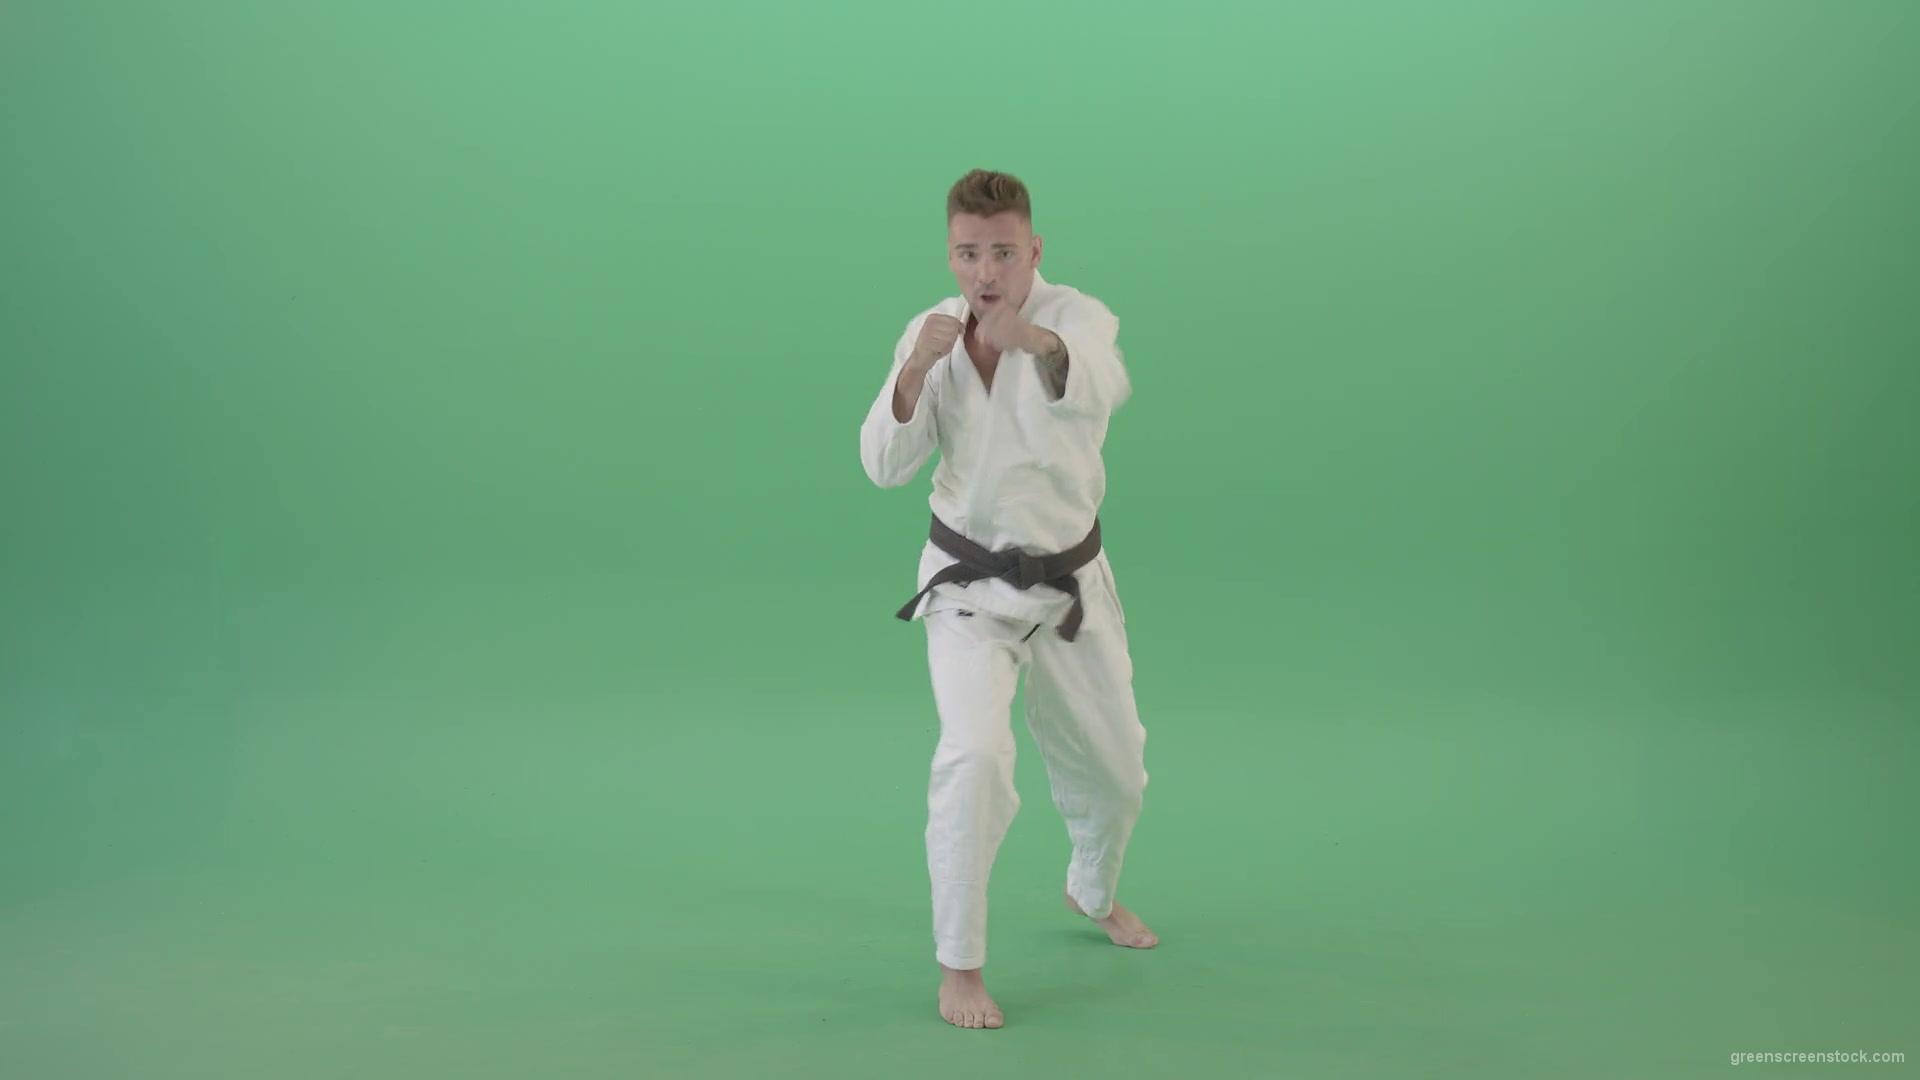 Karate-Man-boxing-making-punch-front-view-isolated-on-green-screen-1920_005 Green Screen Stock